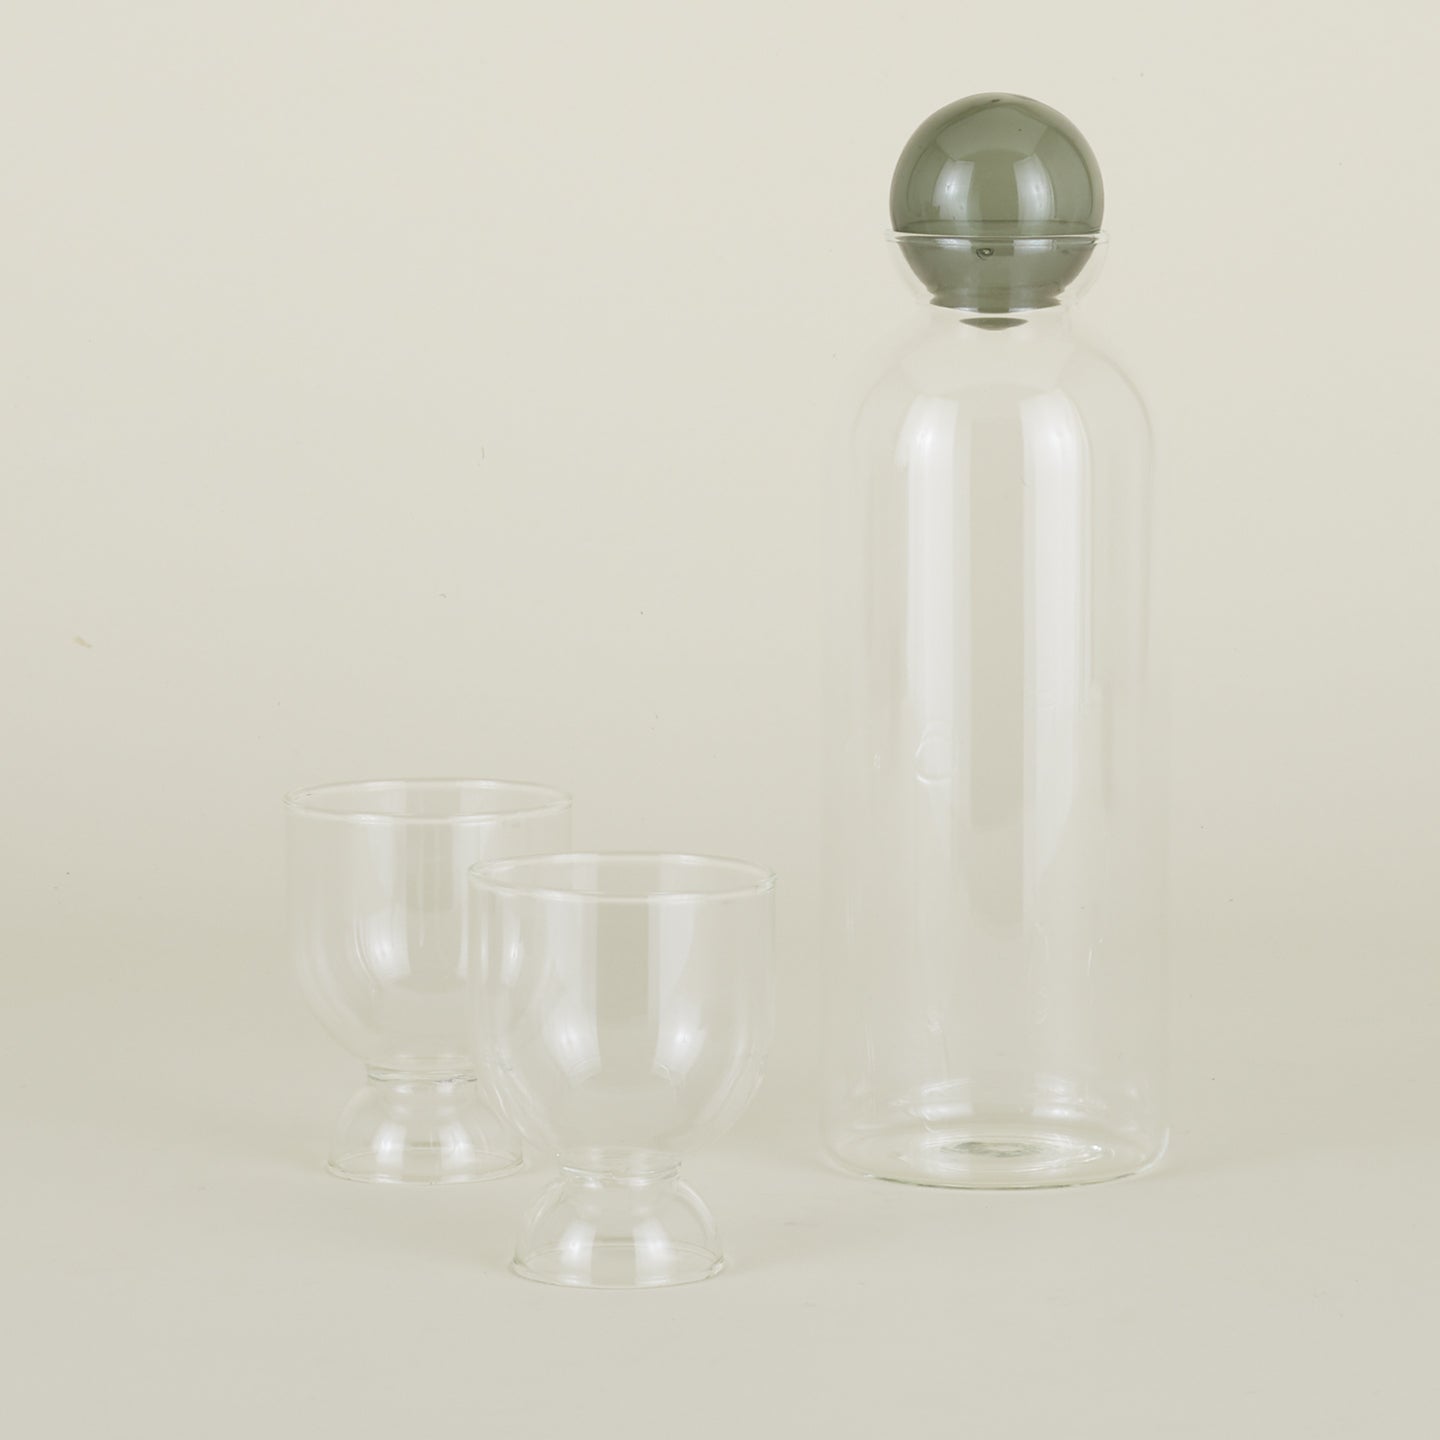 Set of two Still Glasses and Still Carafe.